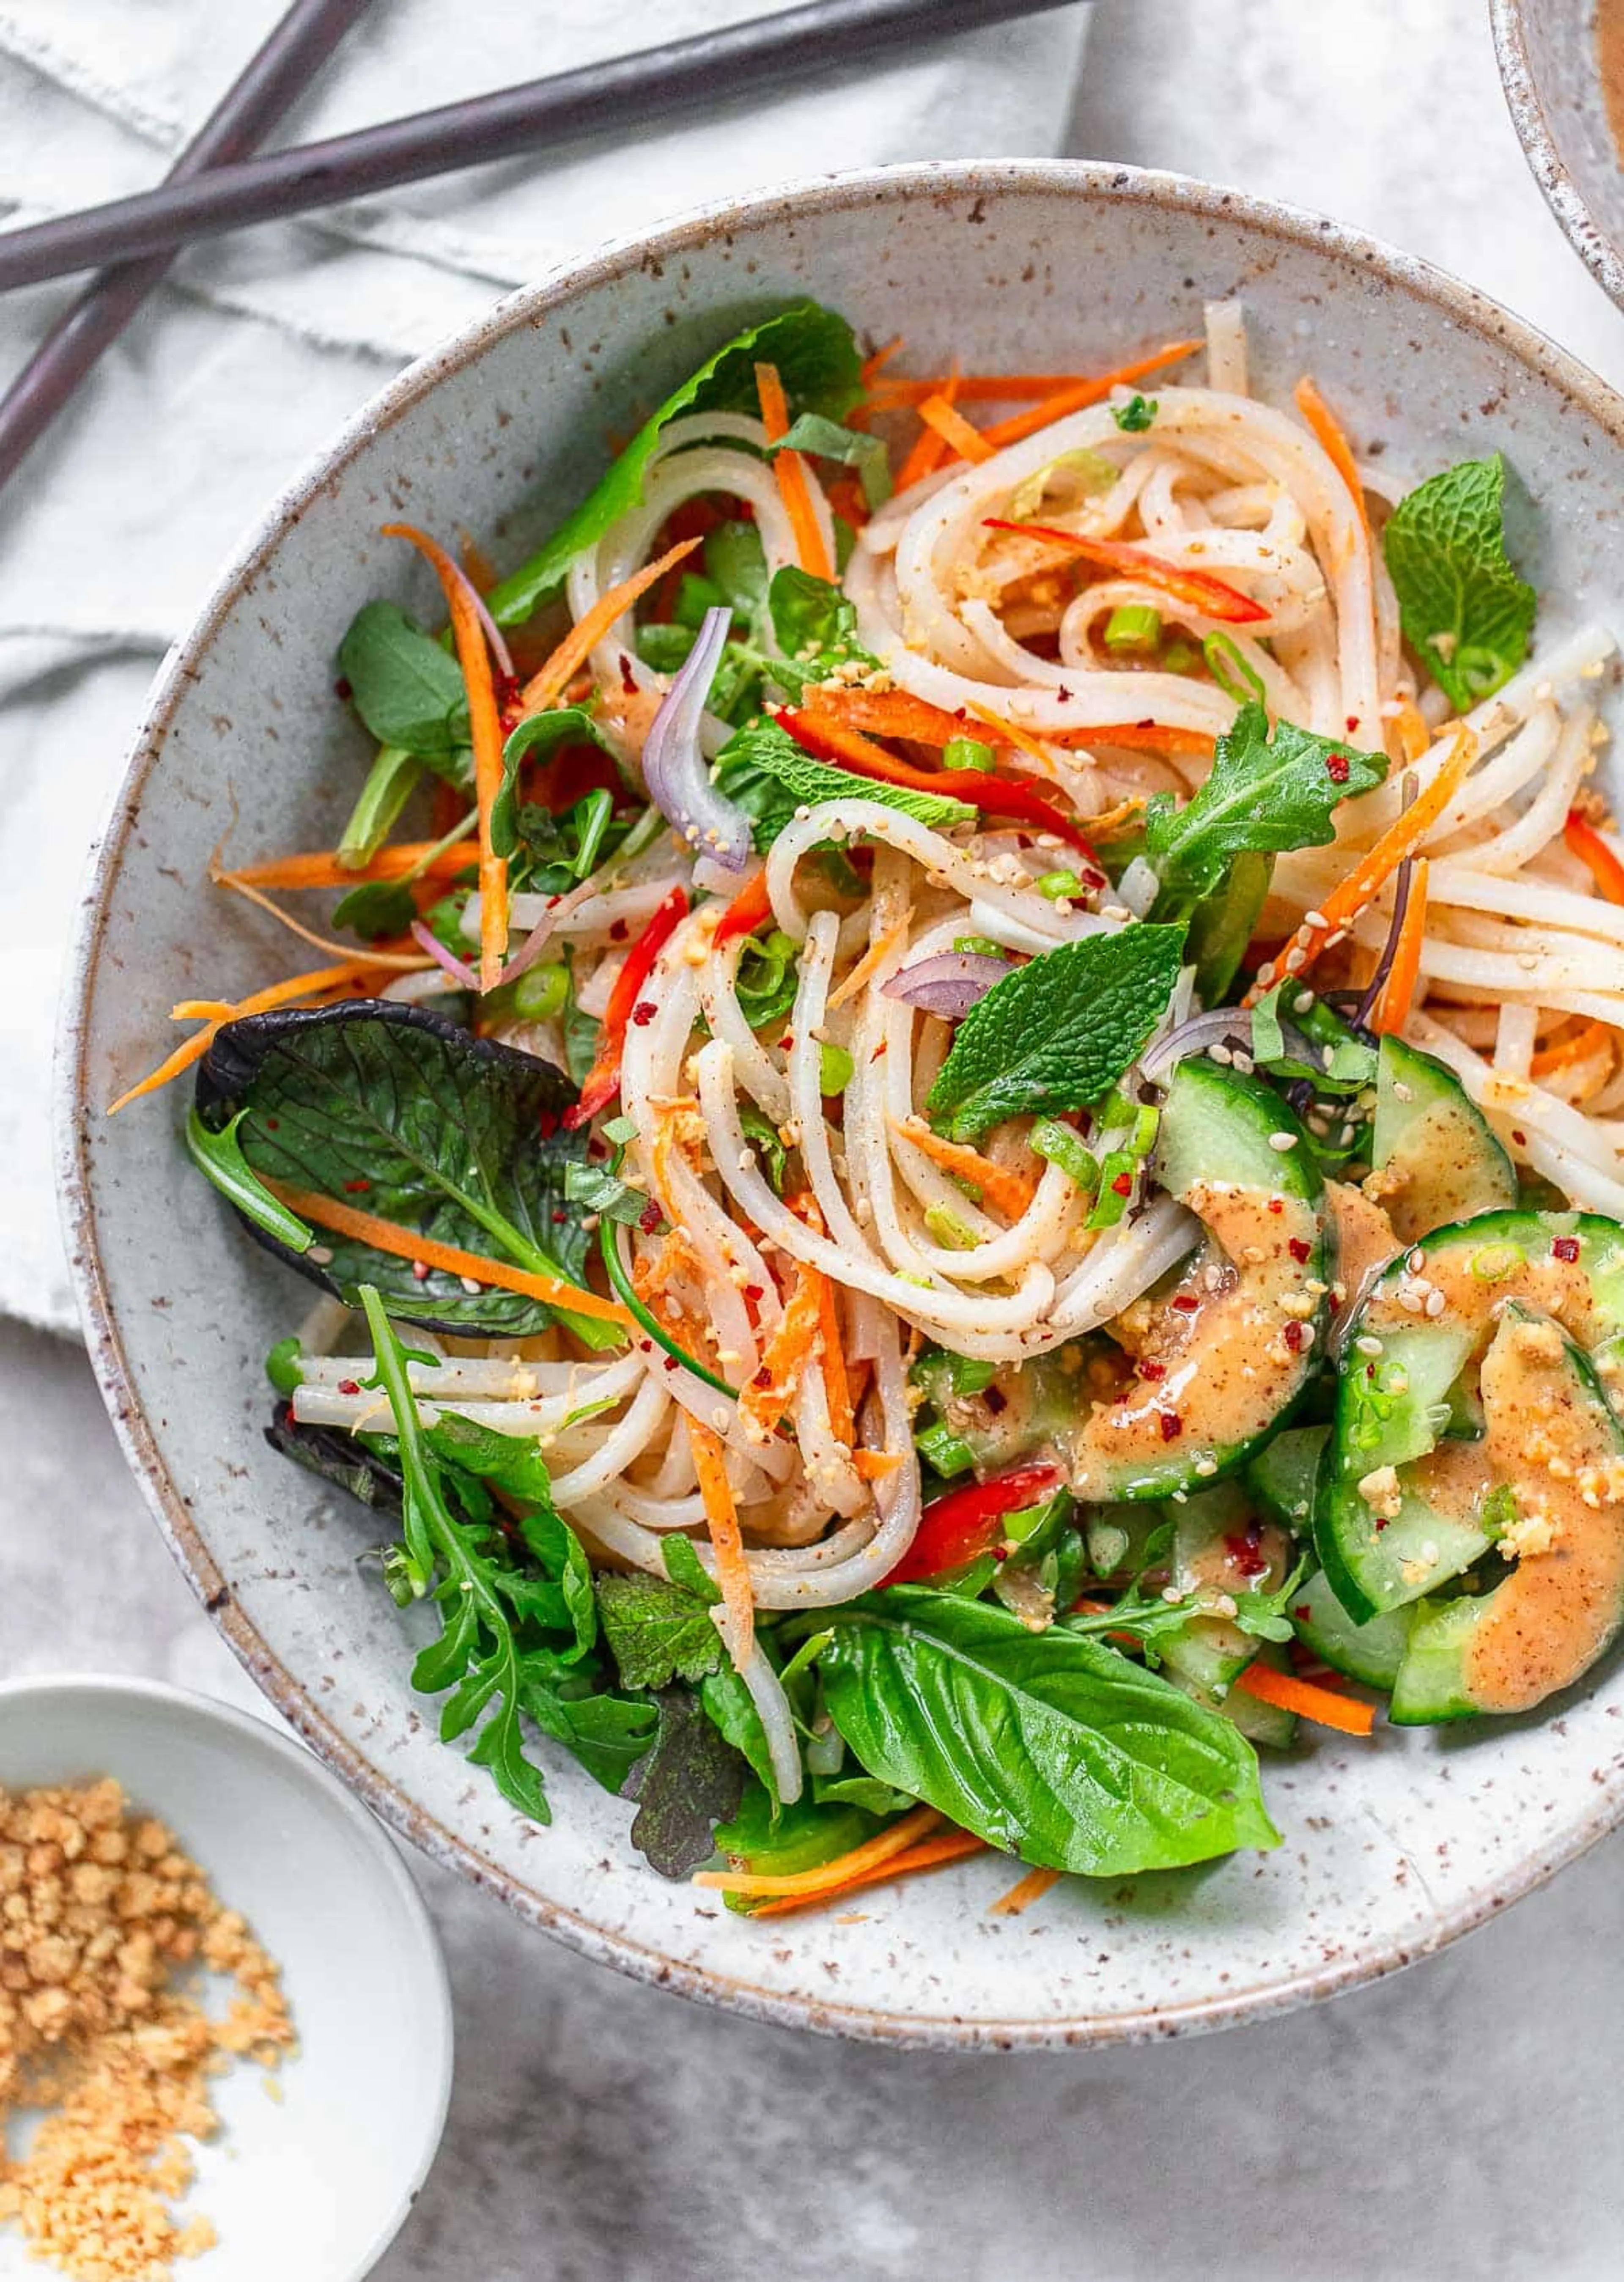 Crunchy Vegetable and Rice Noodle Salad